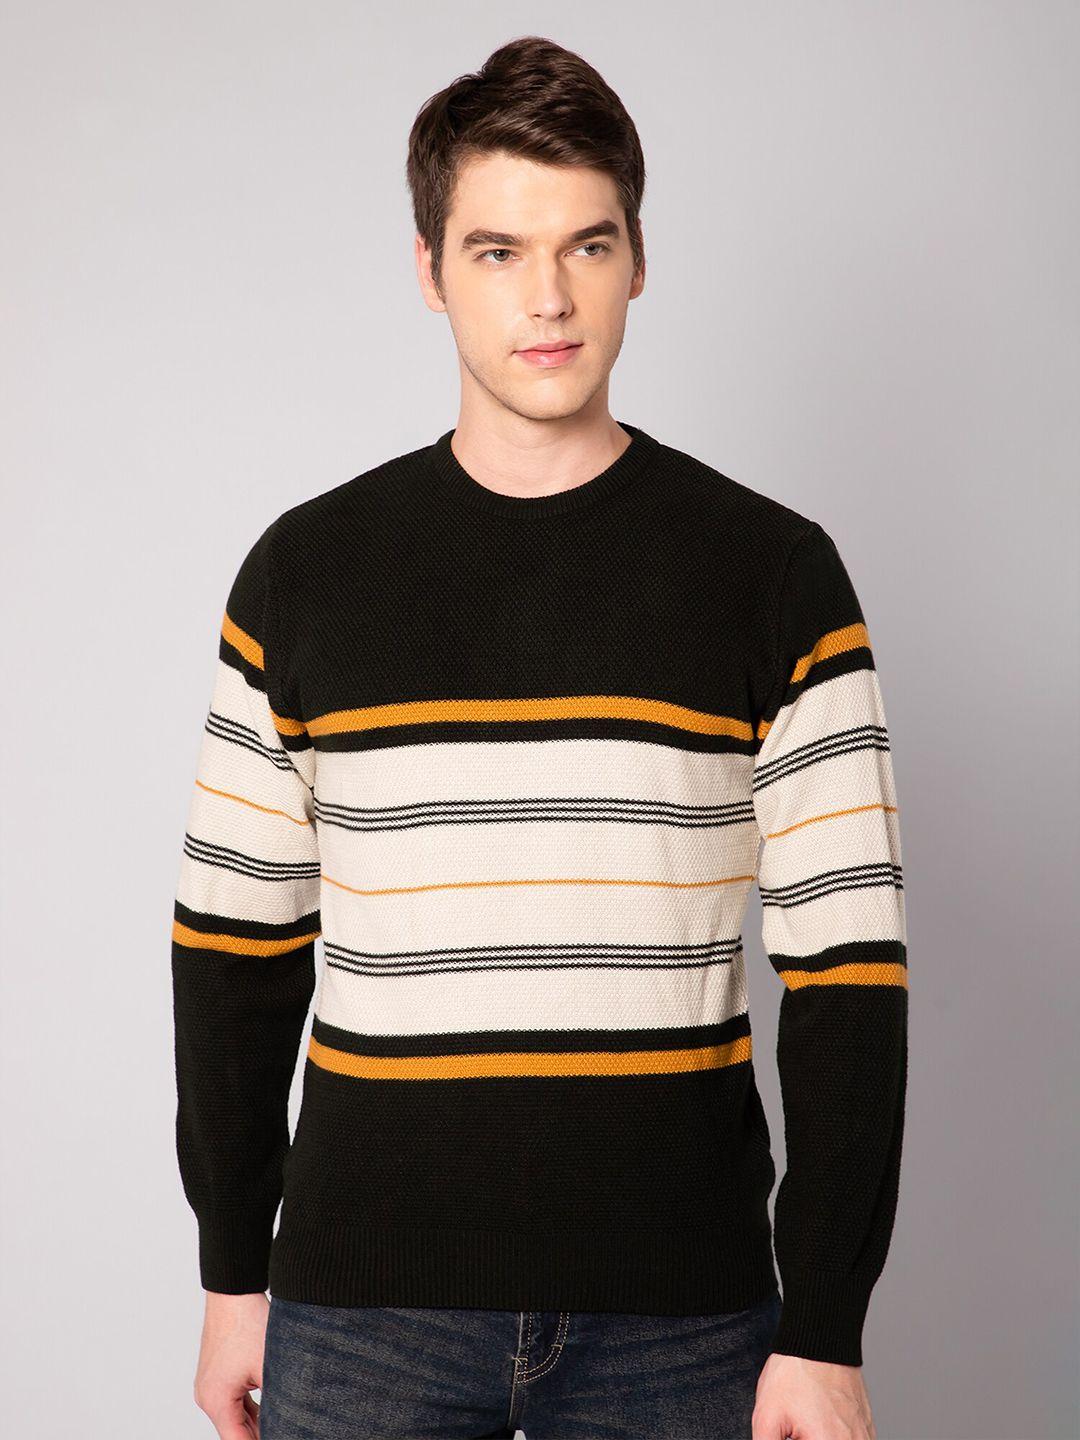 cantabil men olive green & off white striped striped pullover